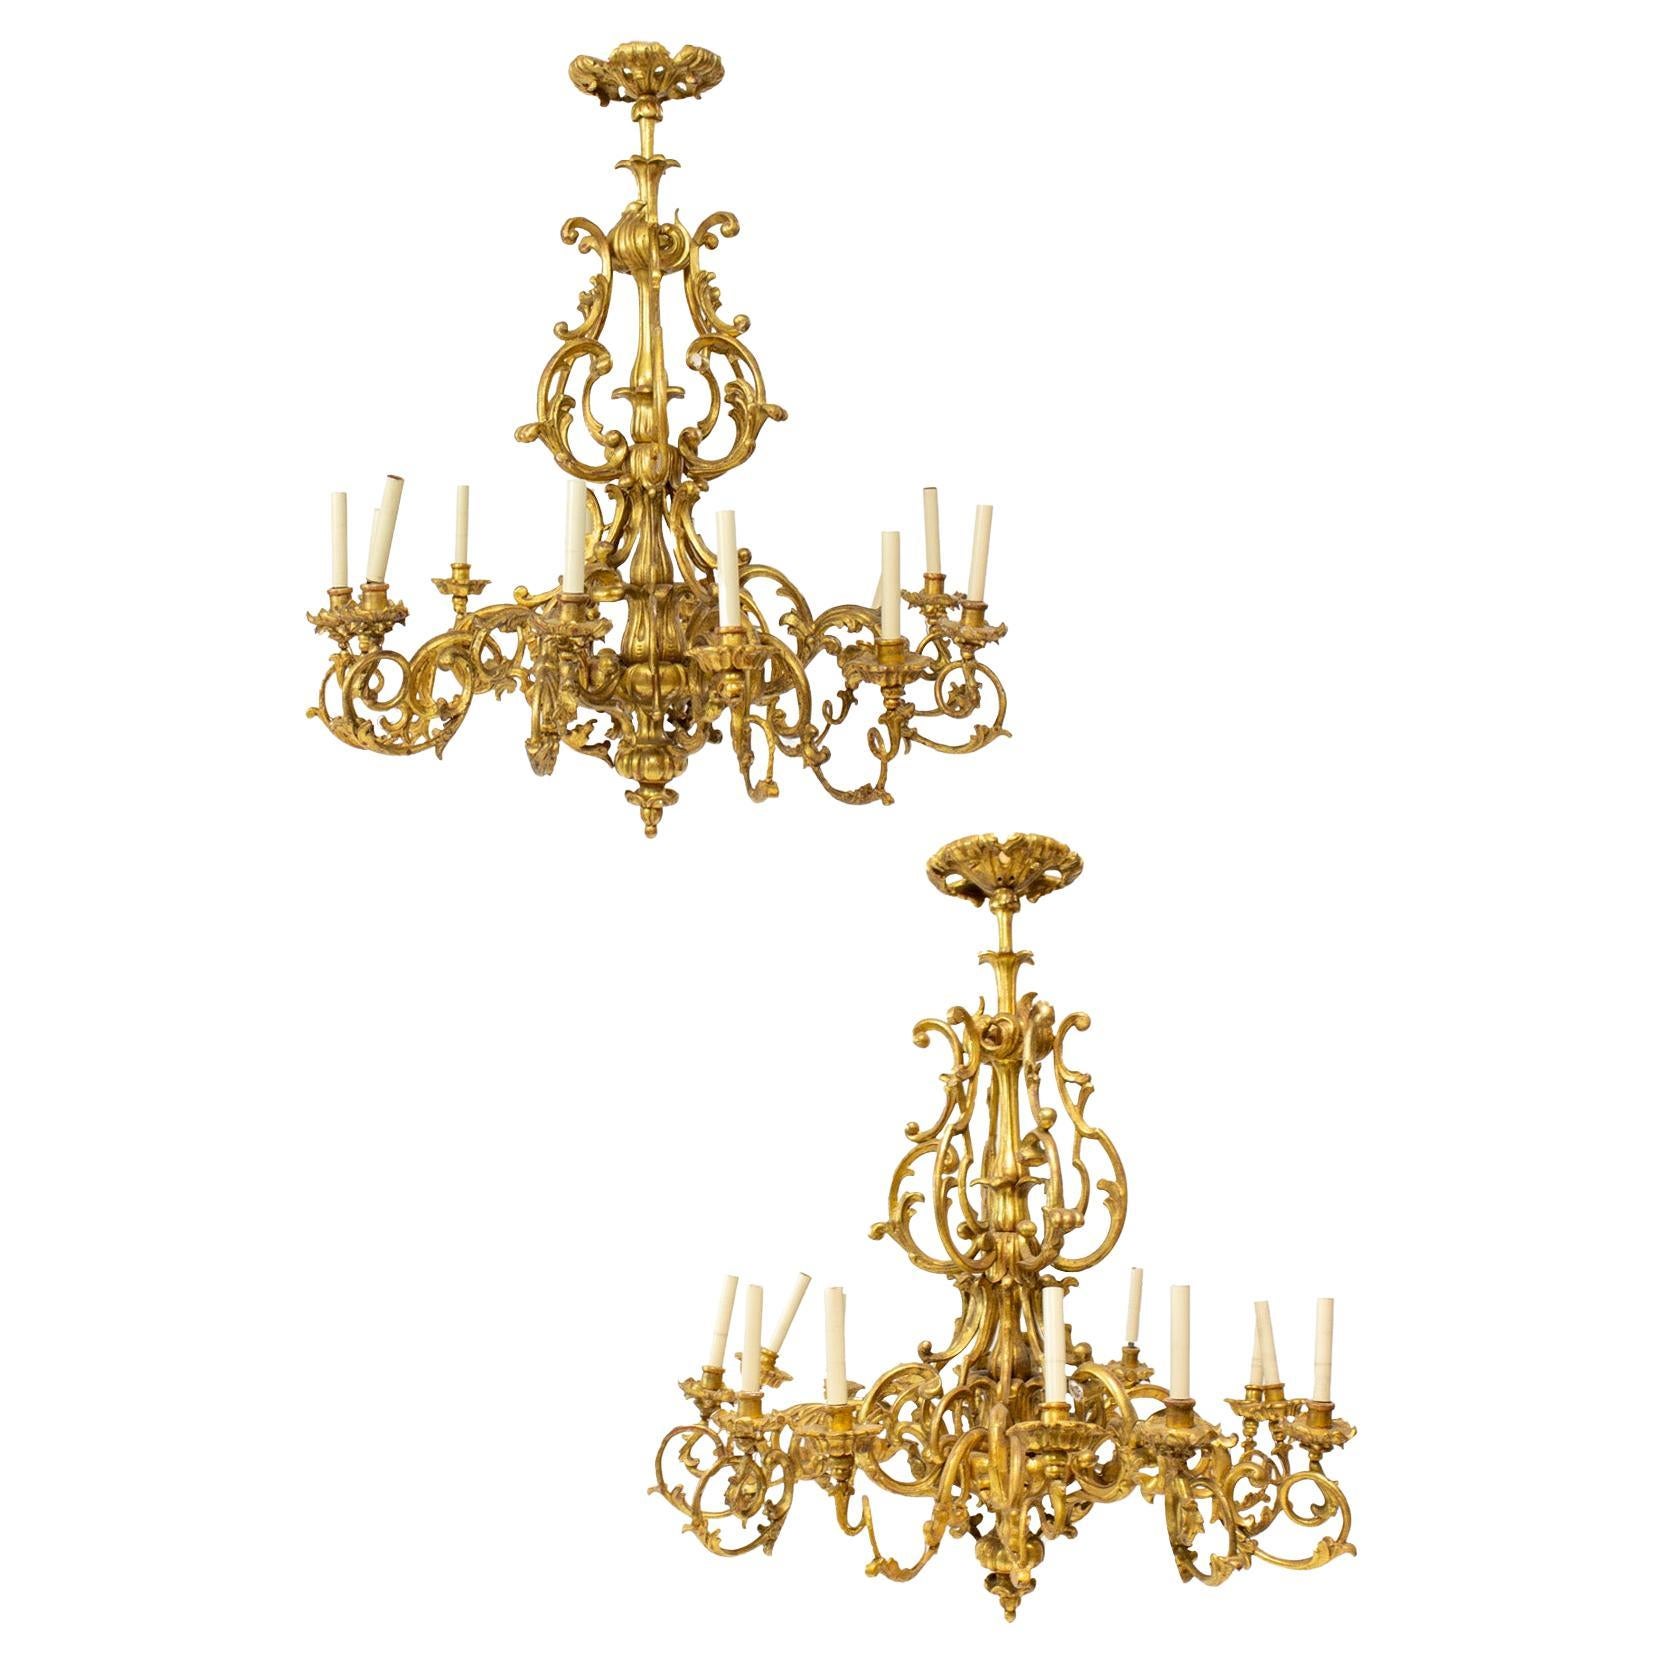 19th Century Rococo French Giltwood Chandeliers, a Pair For Sale